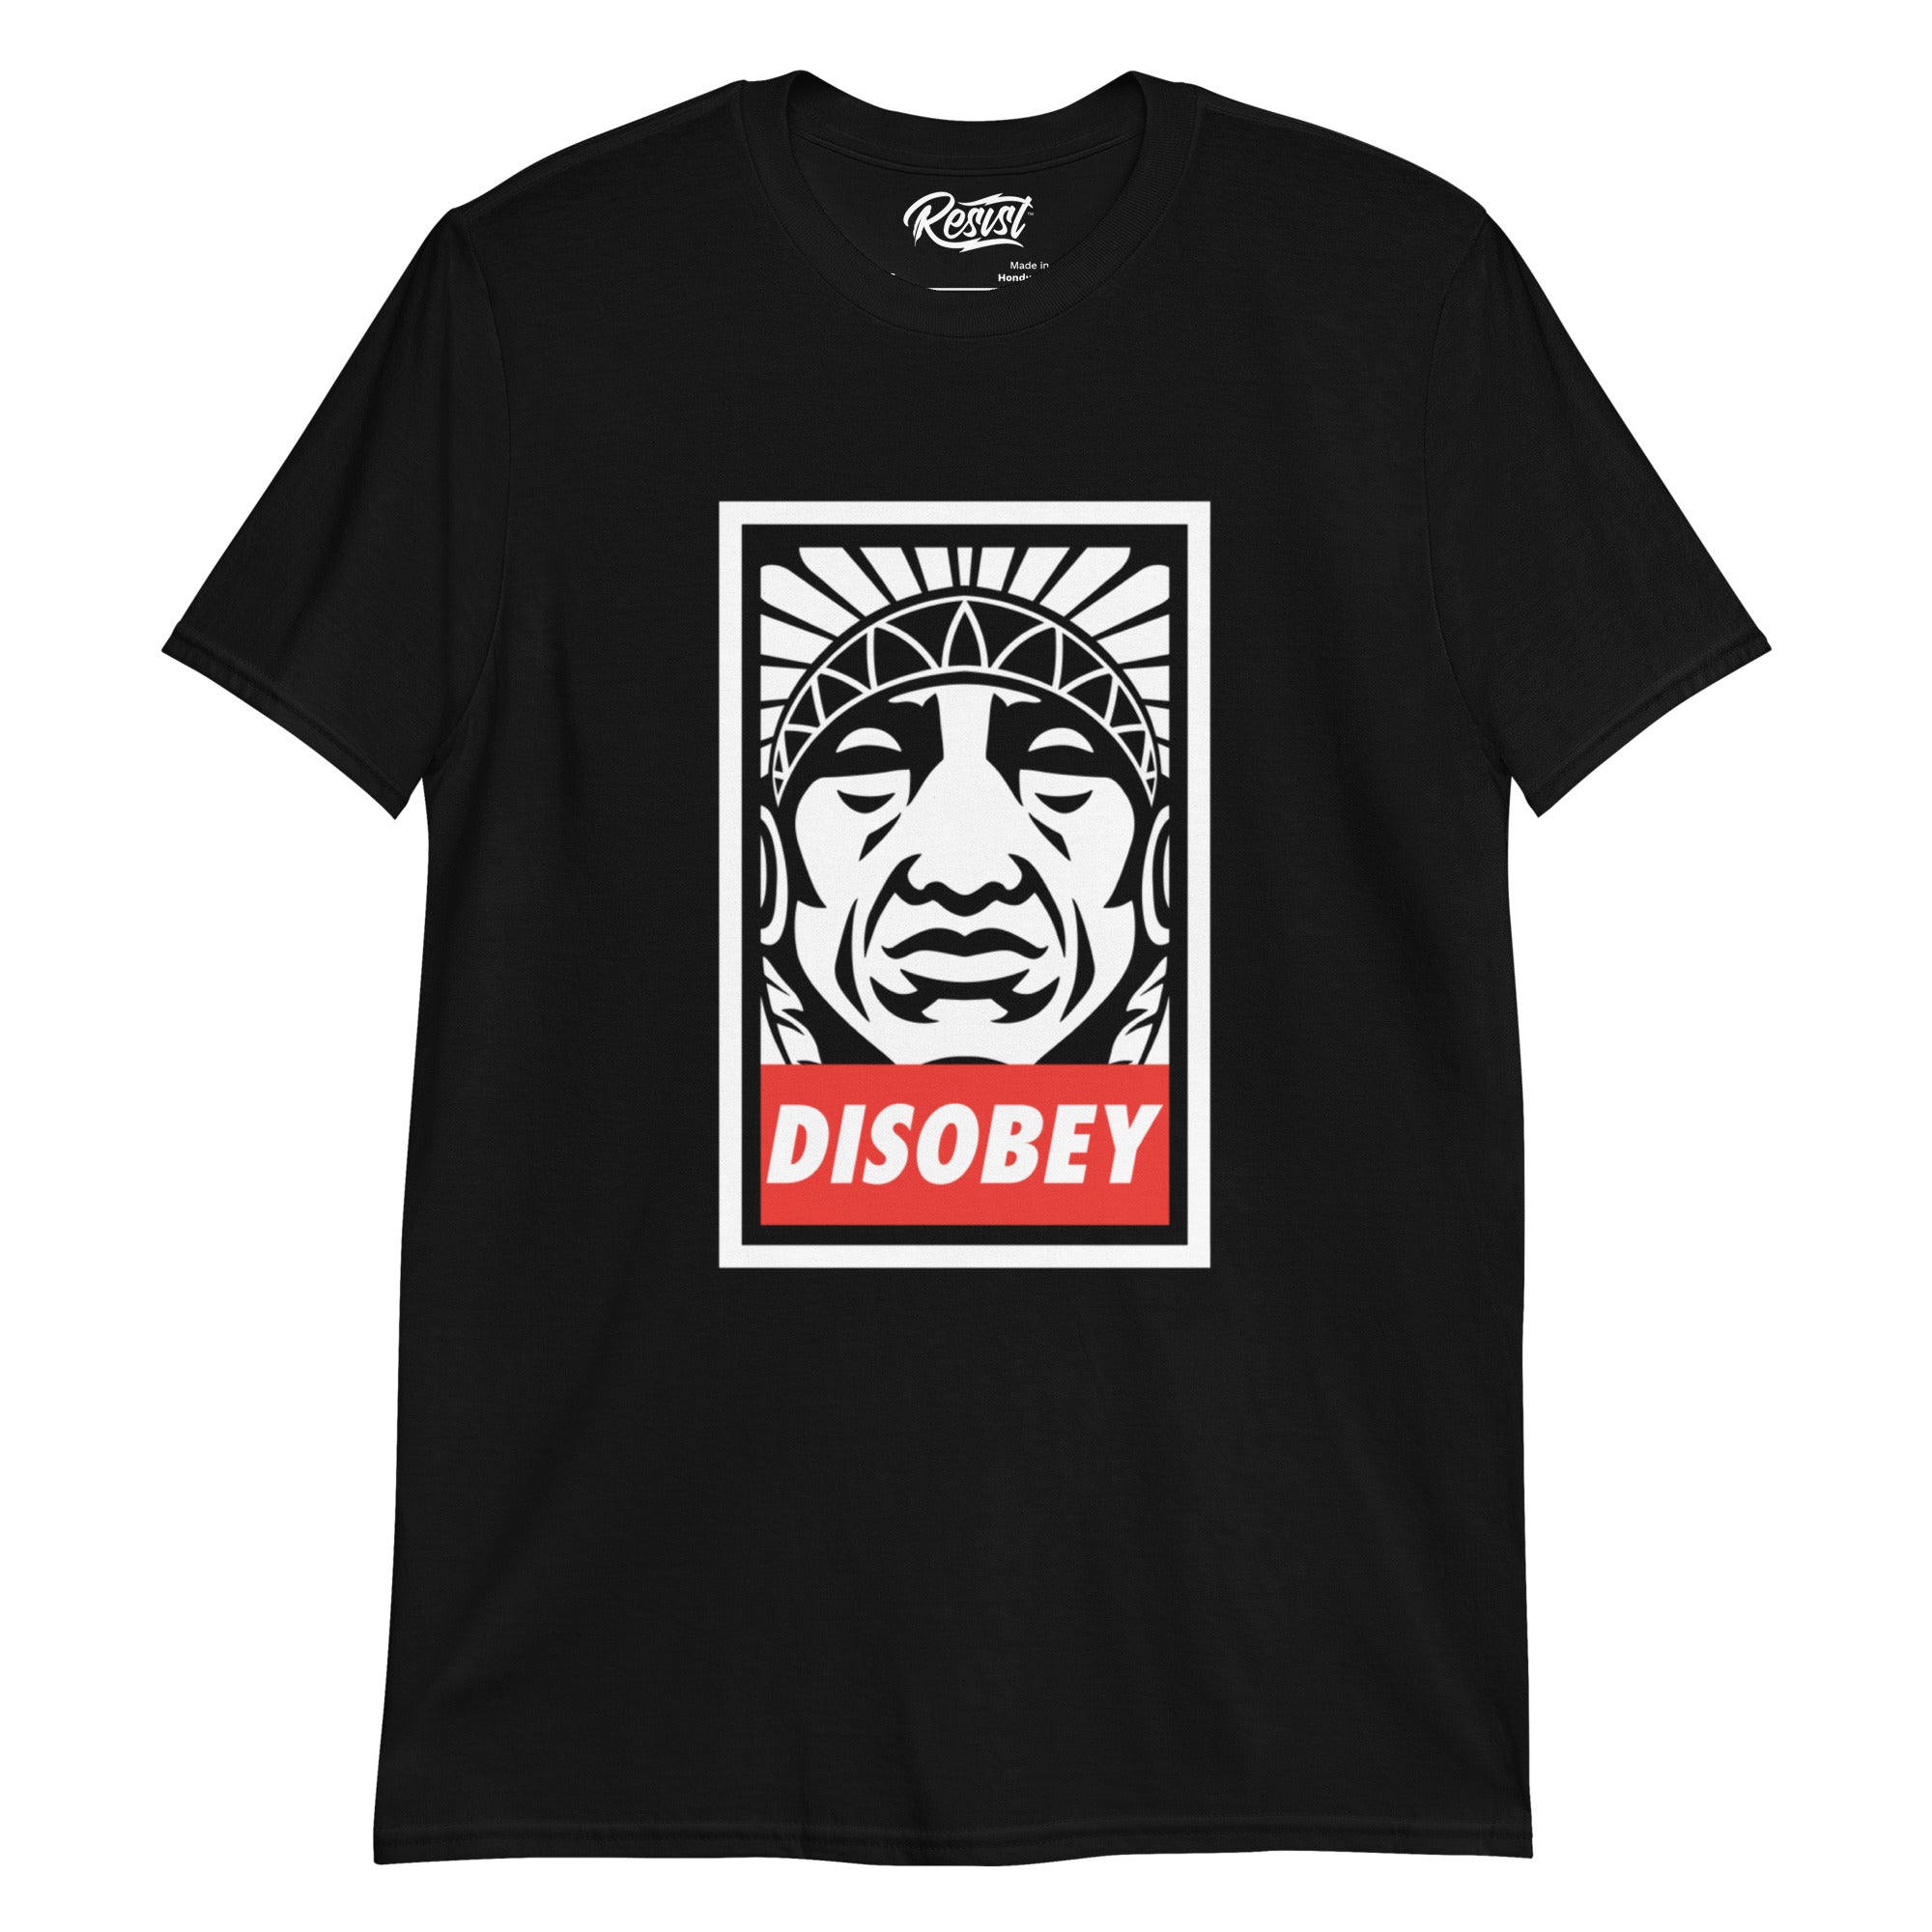 DISOBEY T-shirt